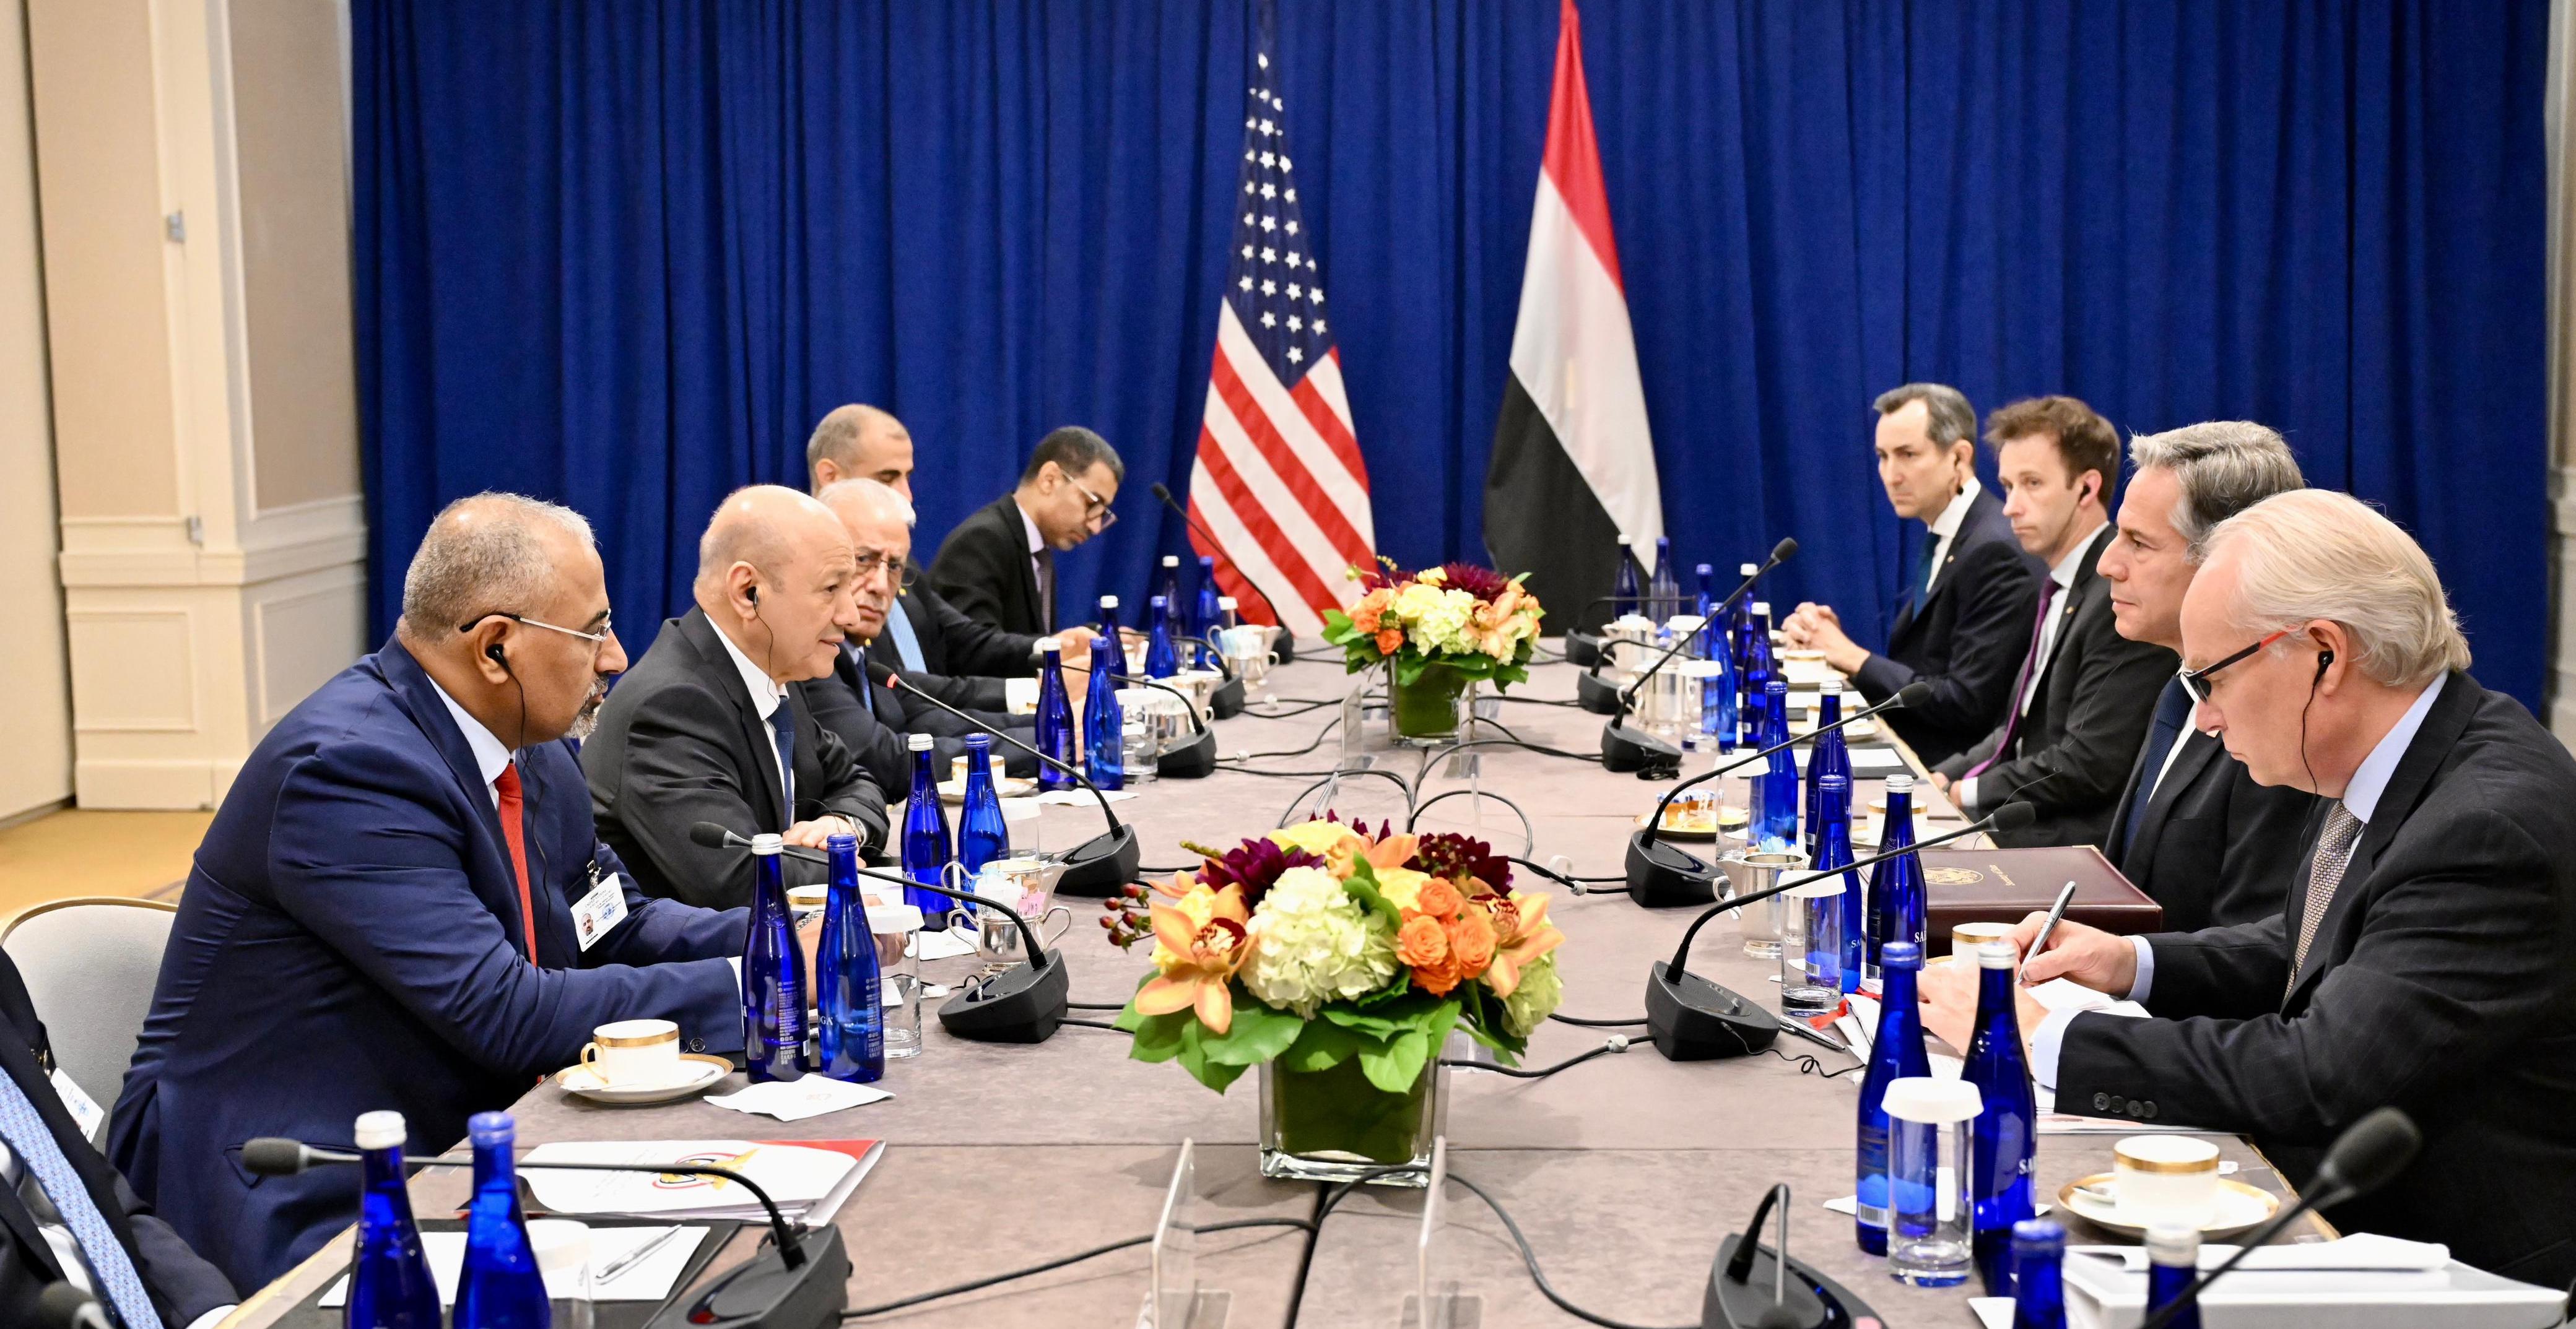 New York: The PLC discusses with Blinken the peace process in Yemen